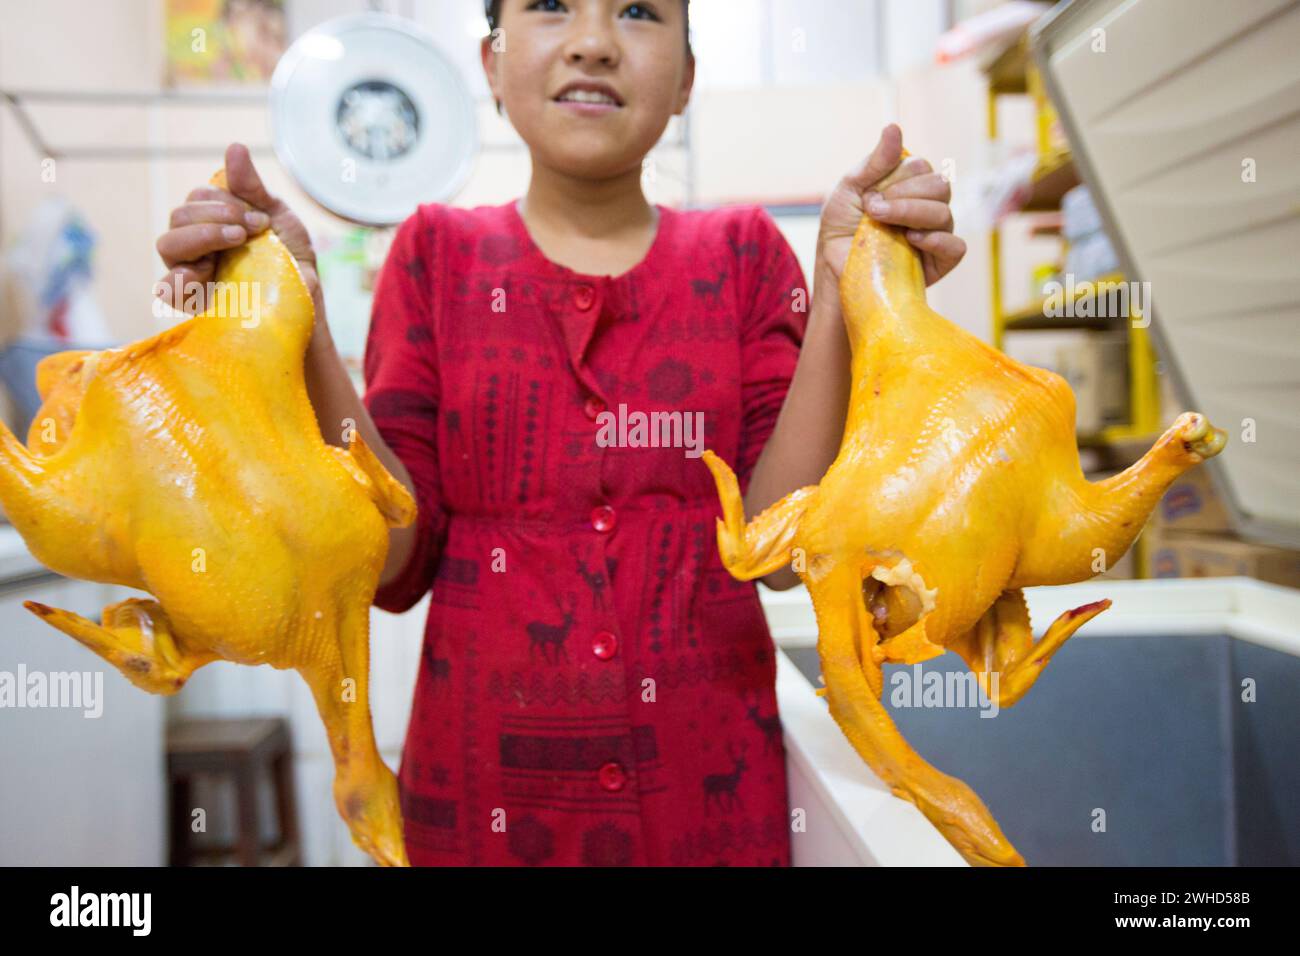 Tupiza, Bolivia - 30th December 2014: Young Asian girl smiling and holding two chickens on sale inside a local shop in Tupiza, Bolivia Stock Photo